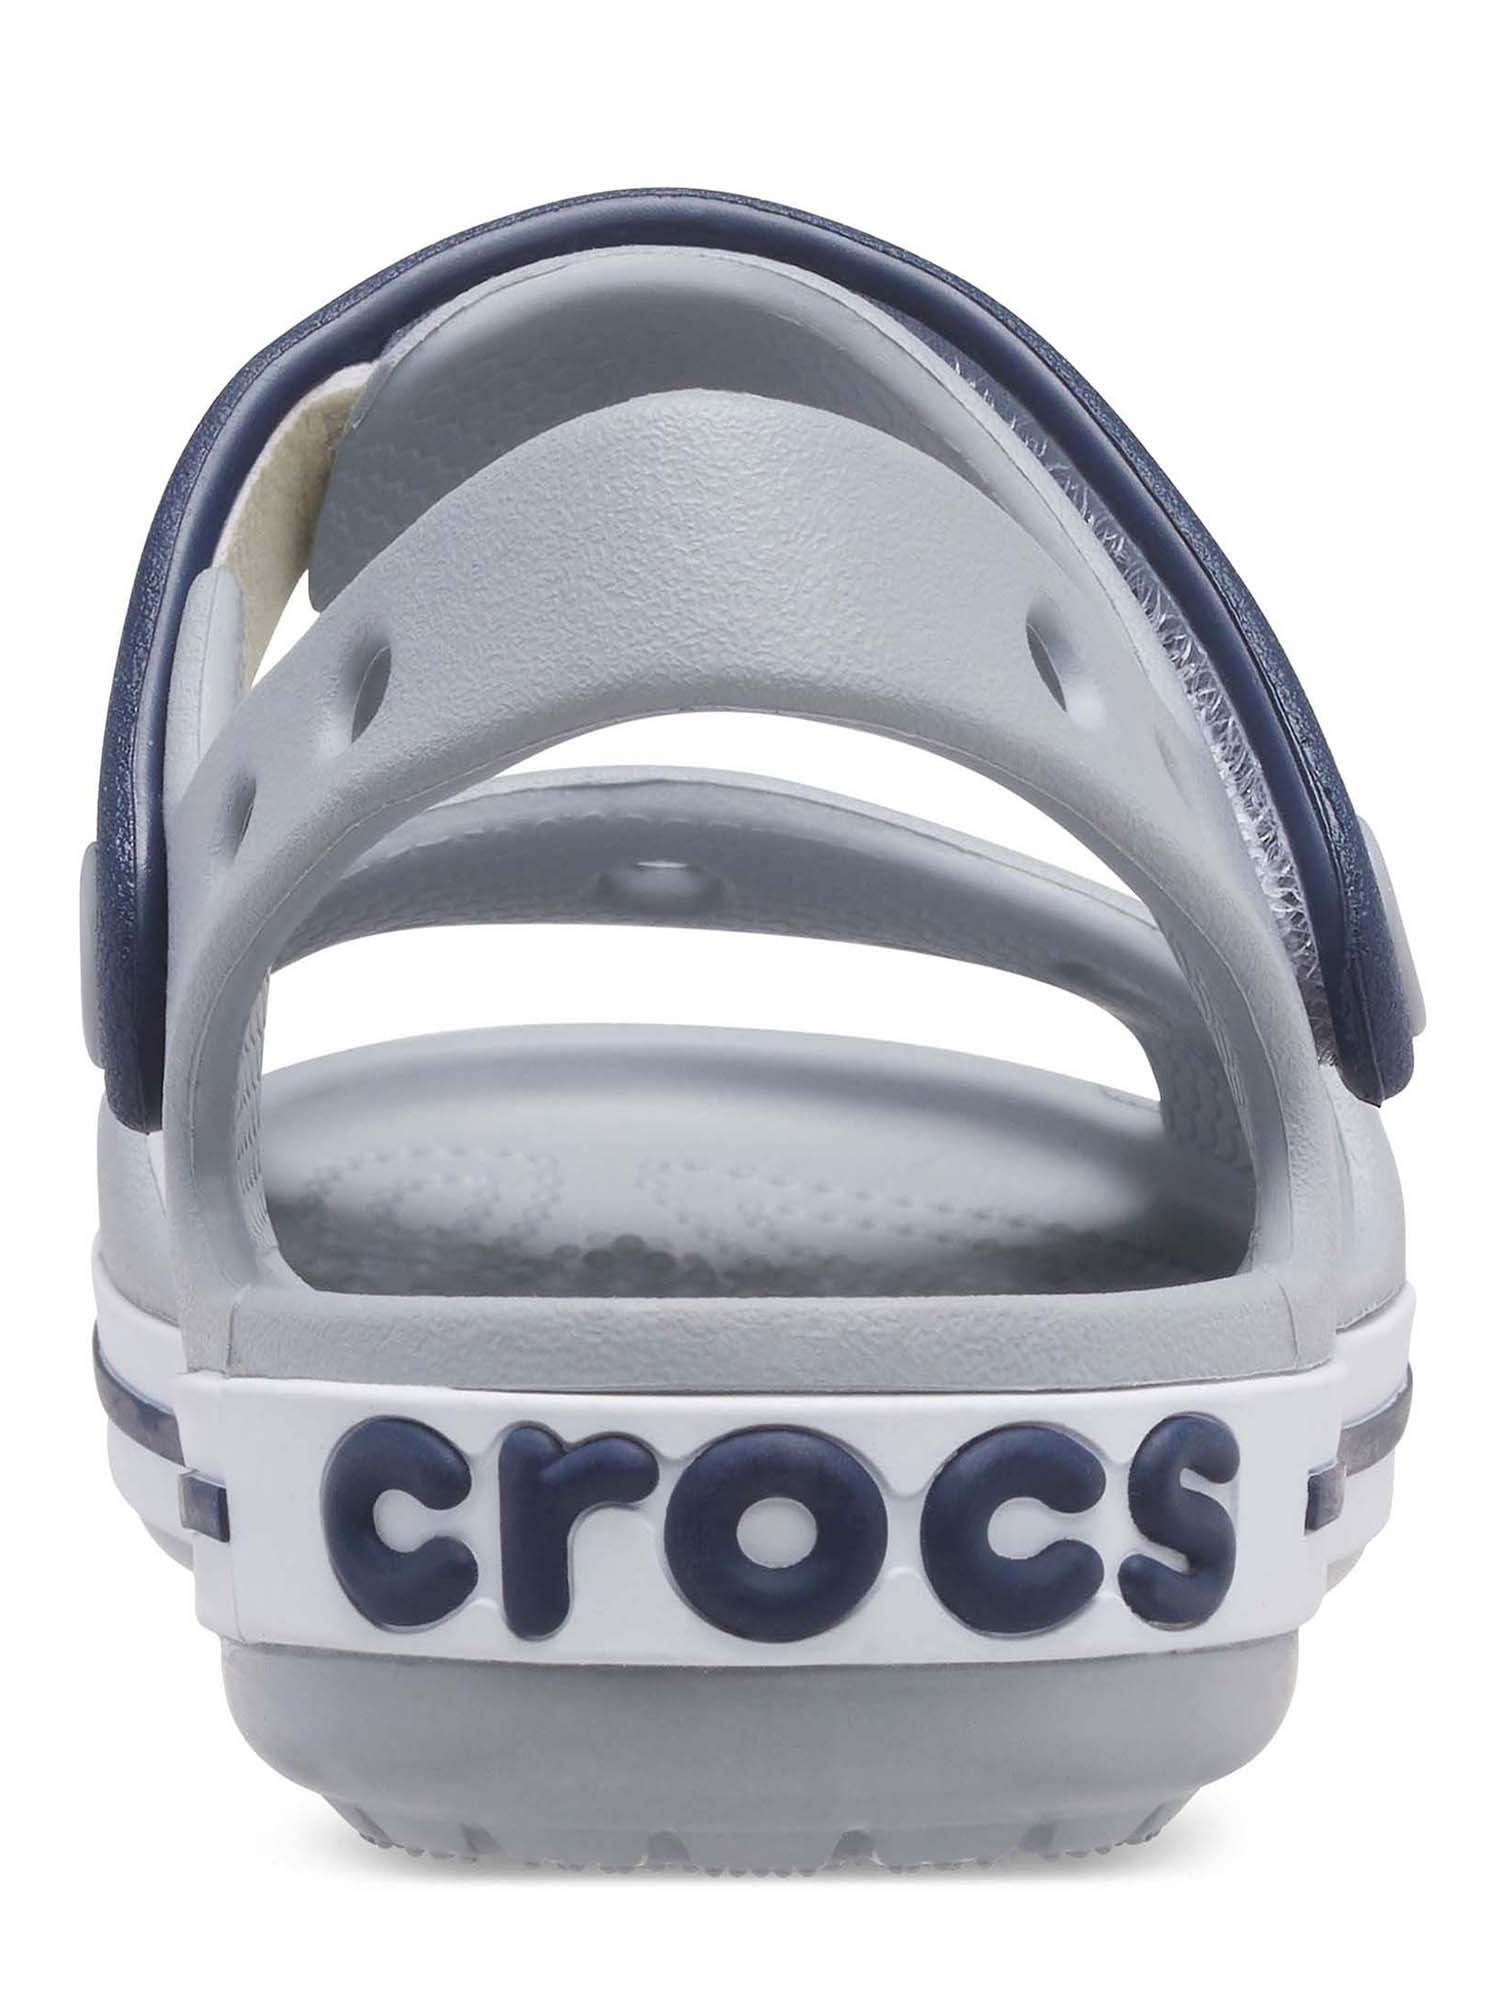 Crocs Toddler and Kids Crocband Cruiser Sandals, Sizes 4-3 - image 5 of 5